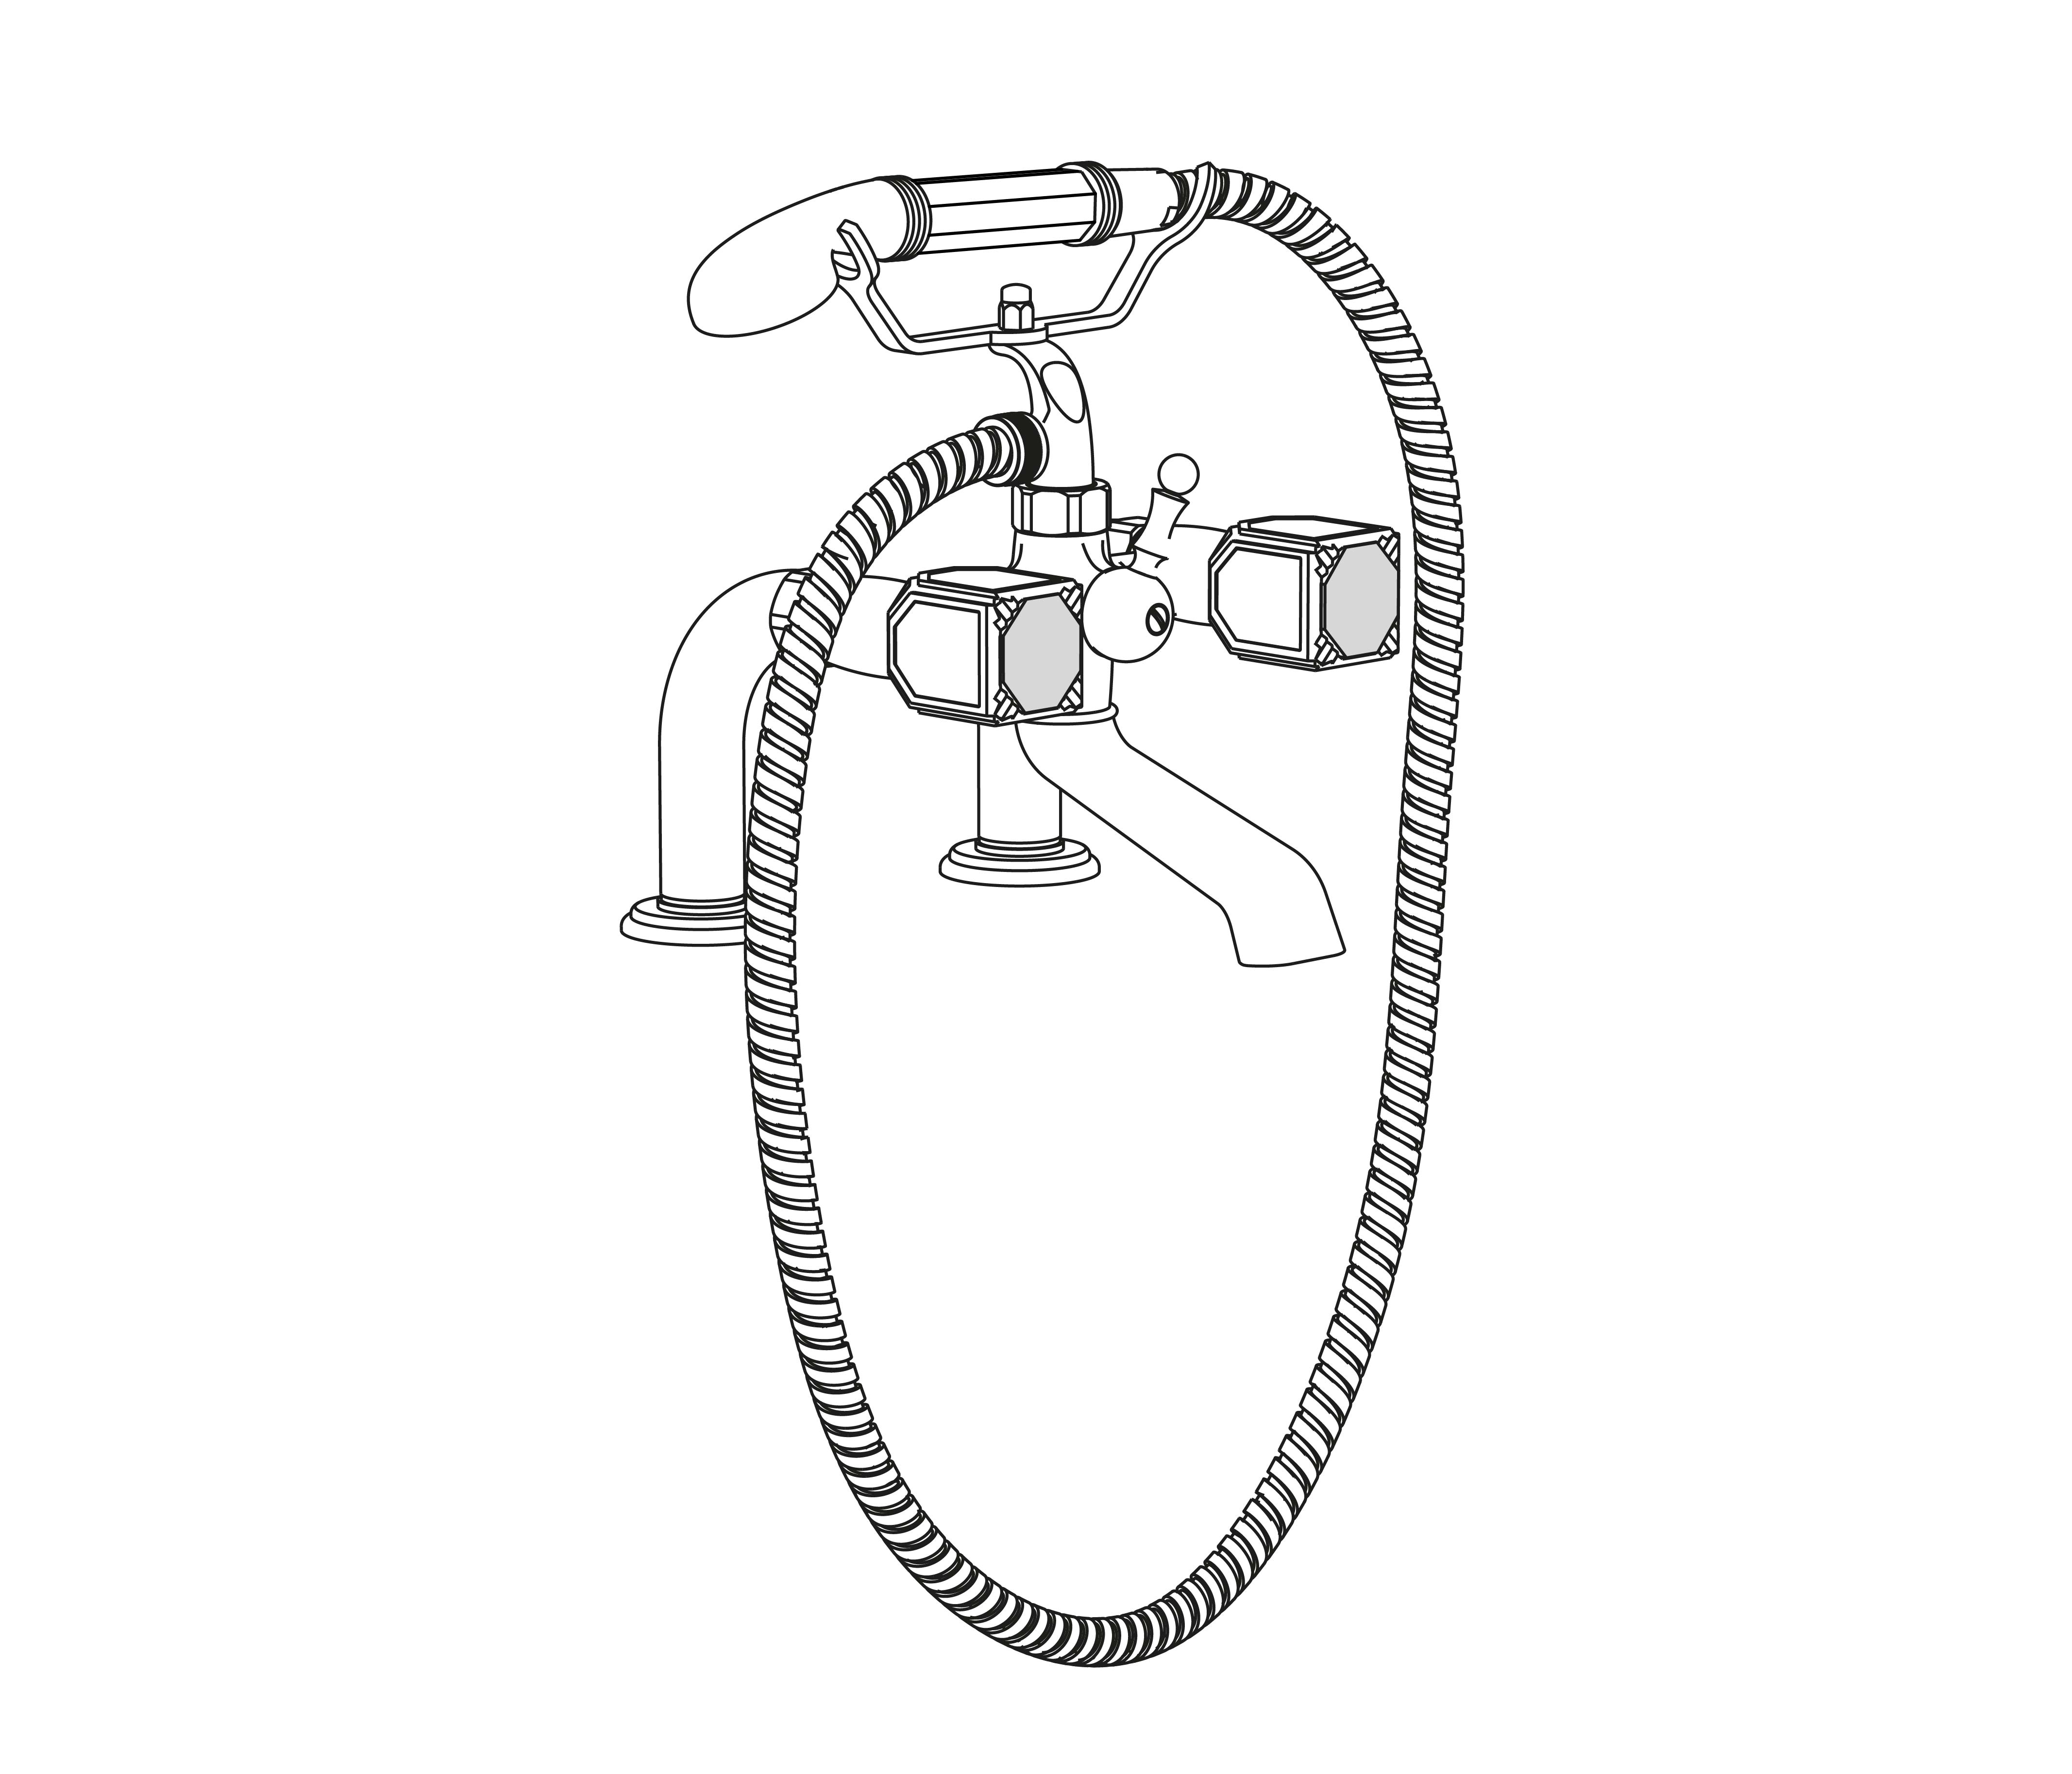 S58-3306 Rim mounted bath and shower mixer